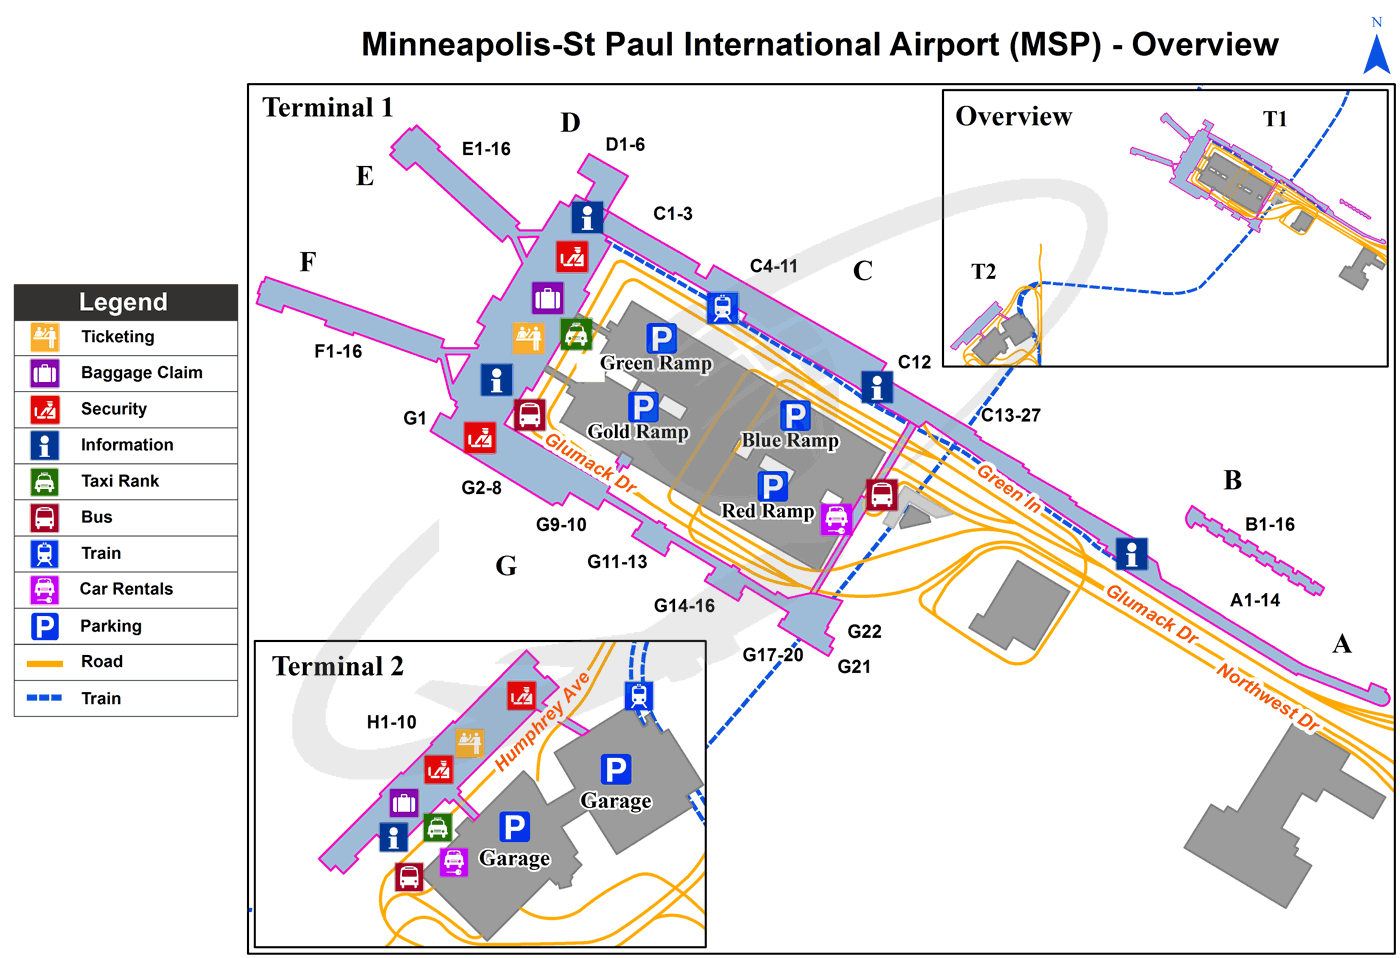 MSP_overview_map